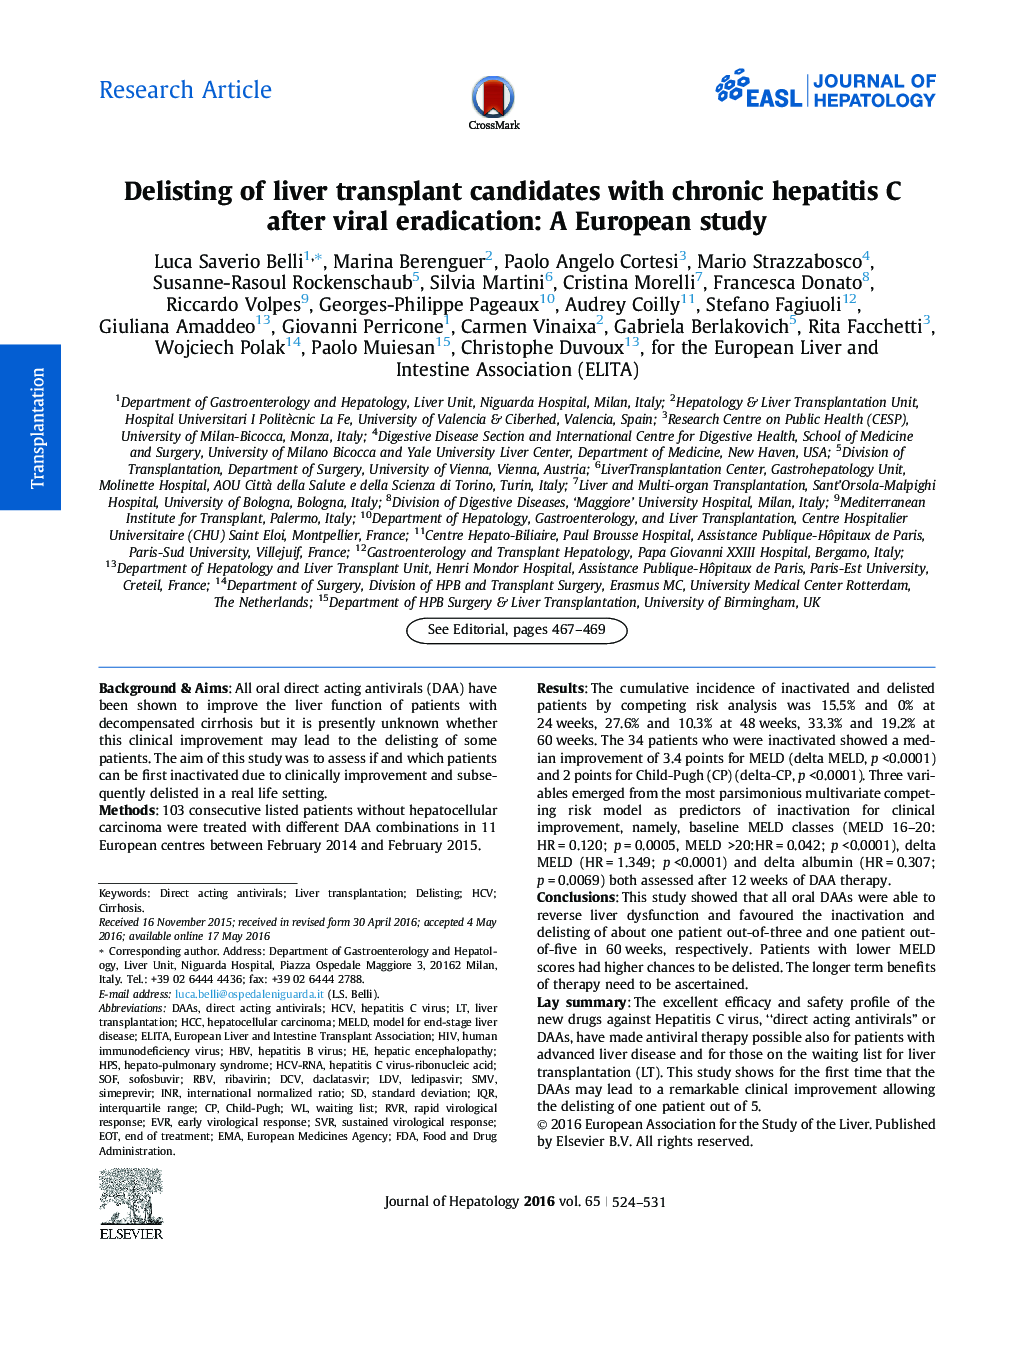 Research ArticleDelisting of liver transplant candidates with chronic hepatitis C after viral eradication: A European study